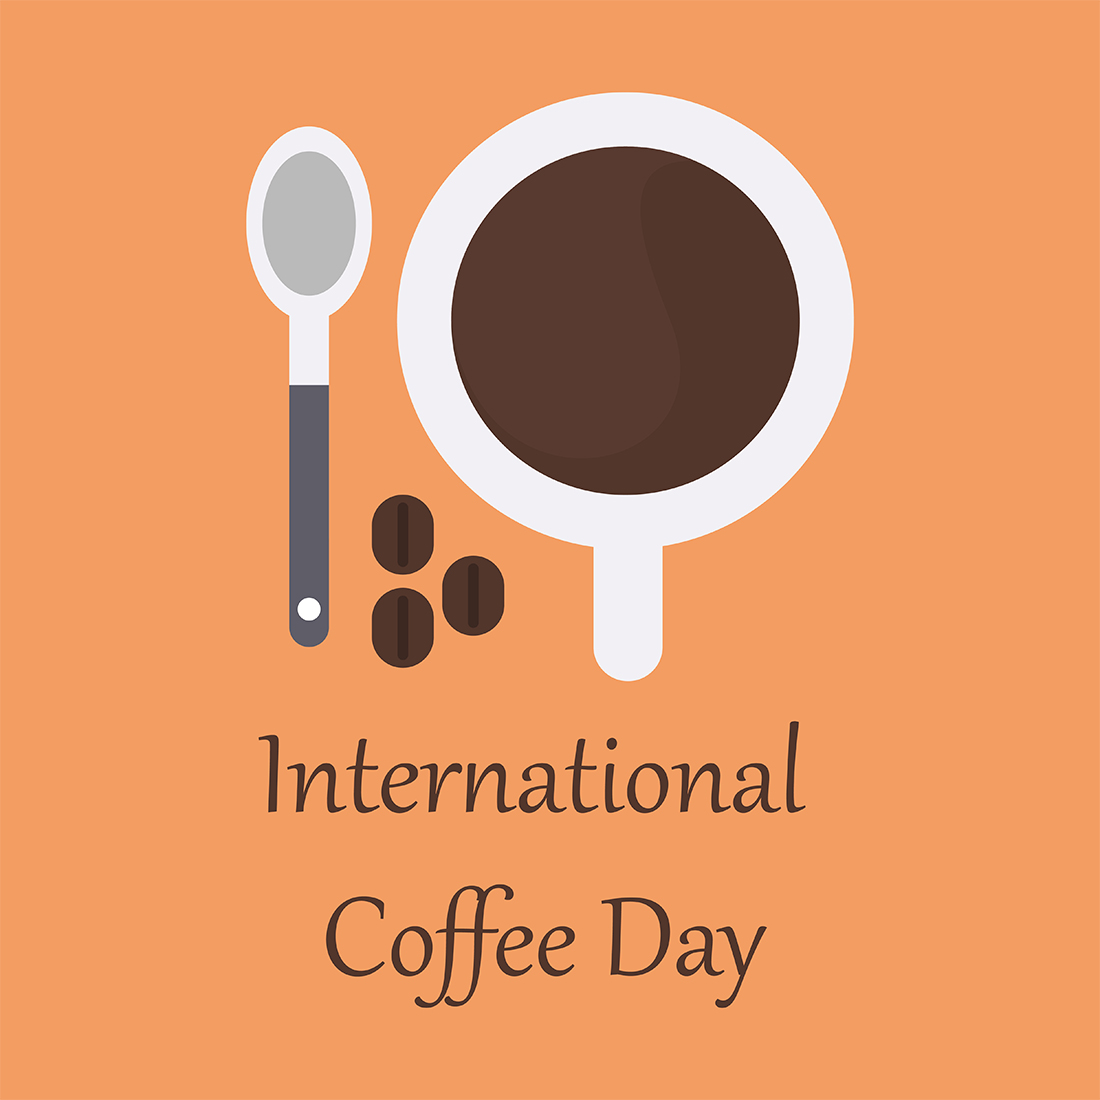 International Coffee Day Design 3 Templates cover image.